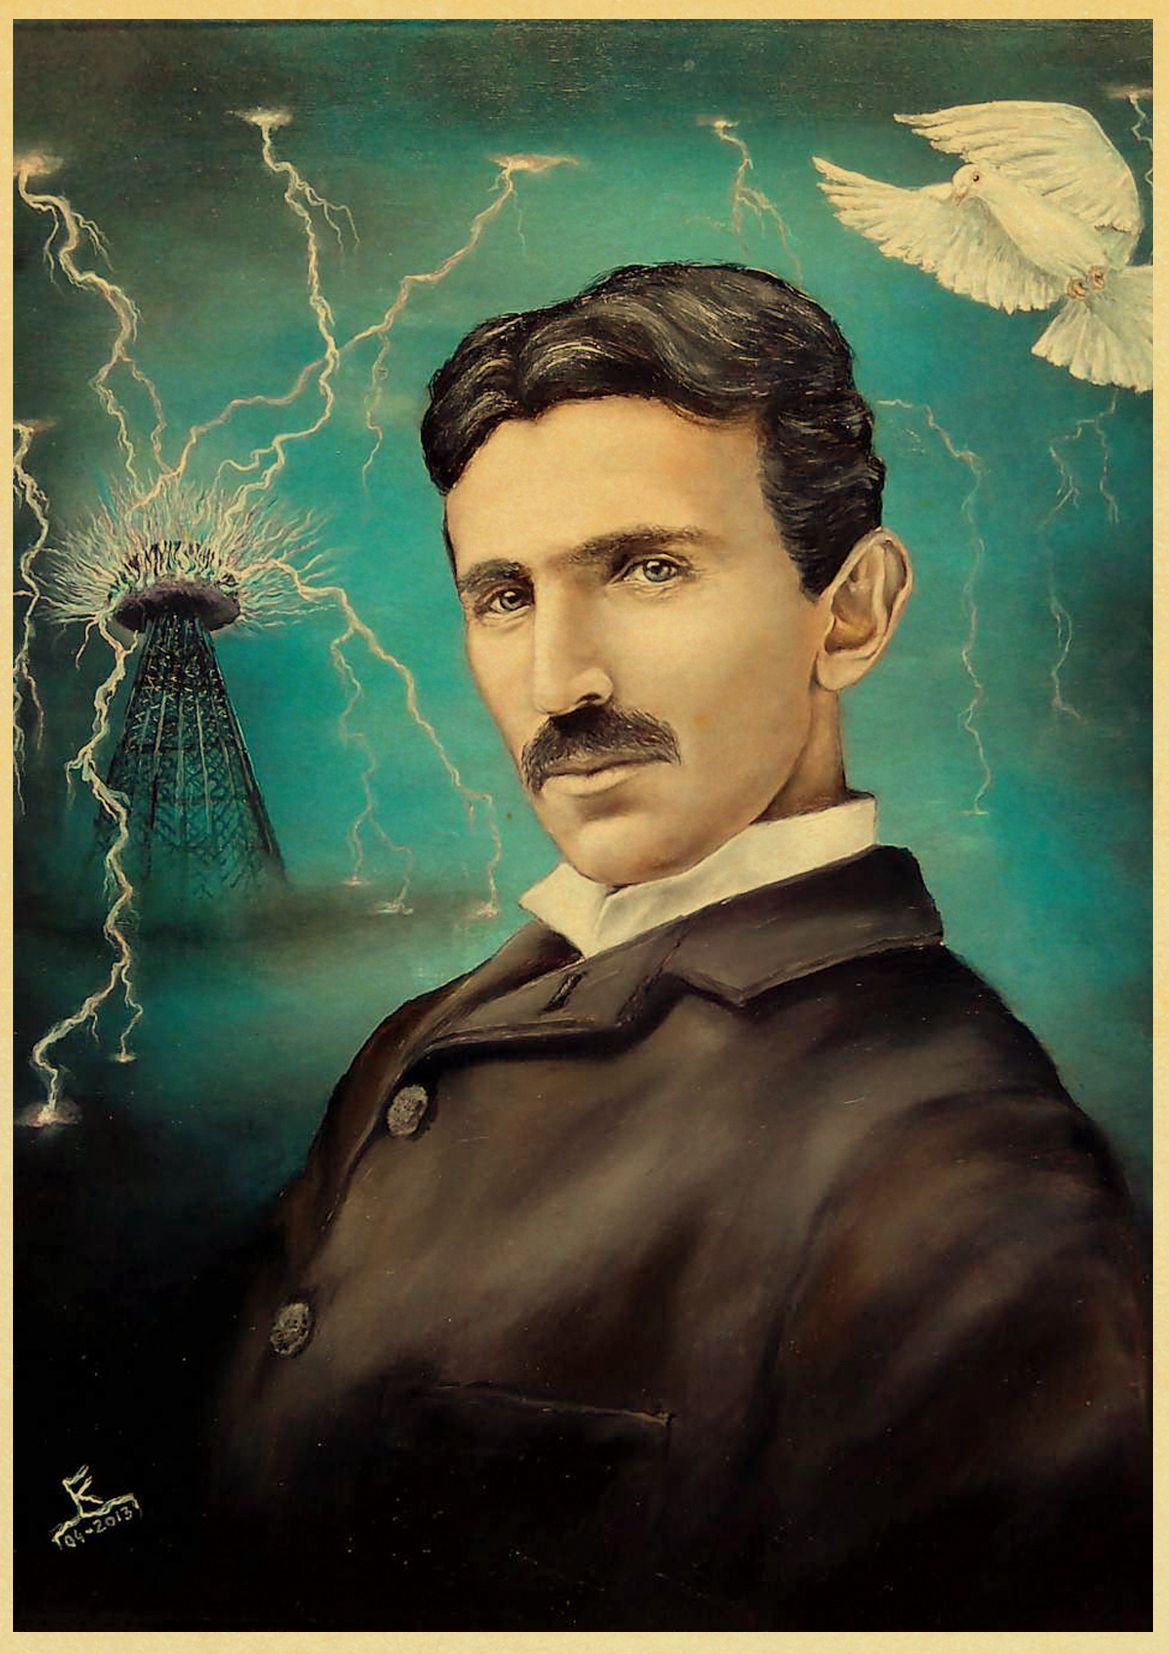 Vintage Poster and Prints Nikola Tesla Poster coil turbine lamp tower patent parchment paper style Art Painting Wall sticker. Painting & Calligraphy